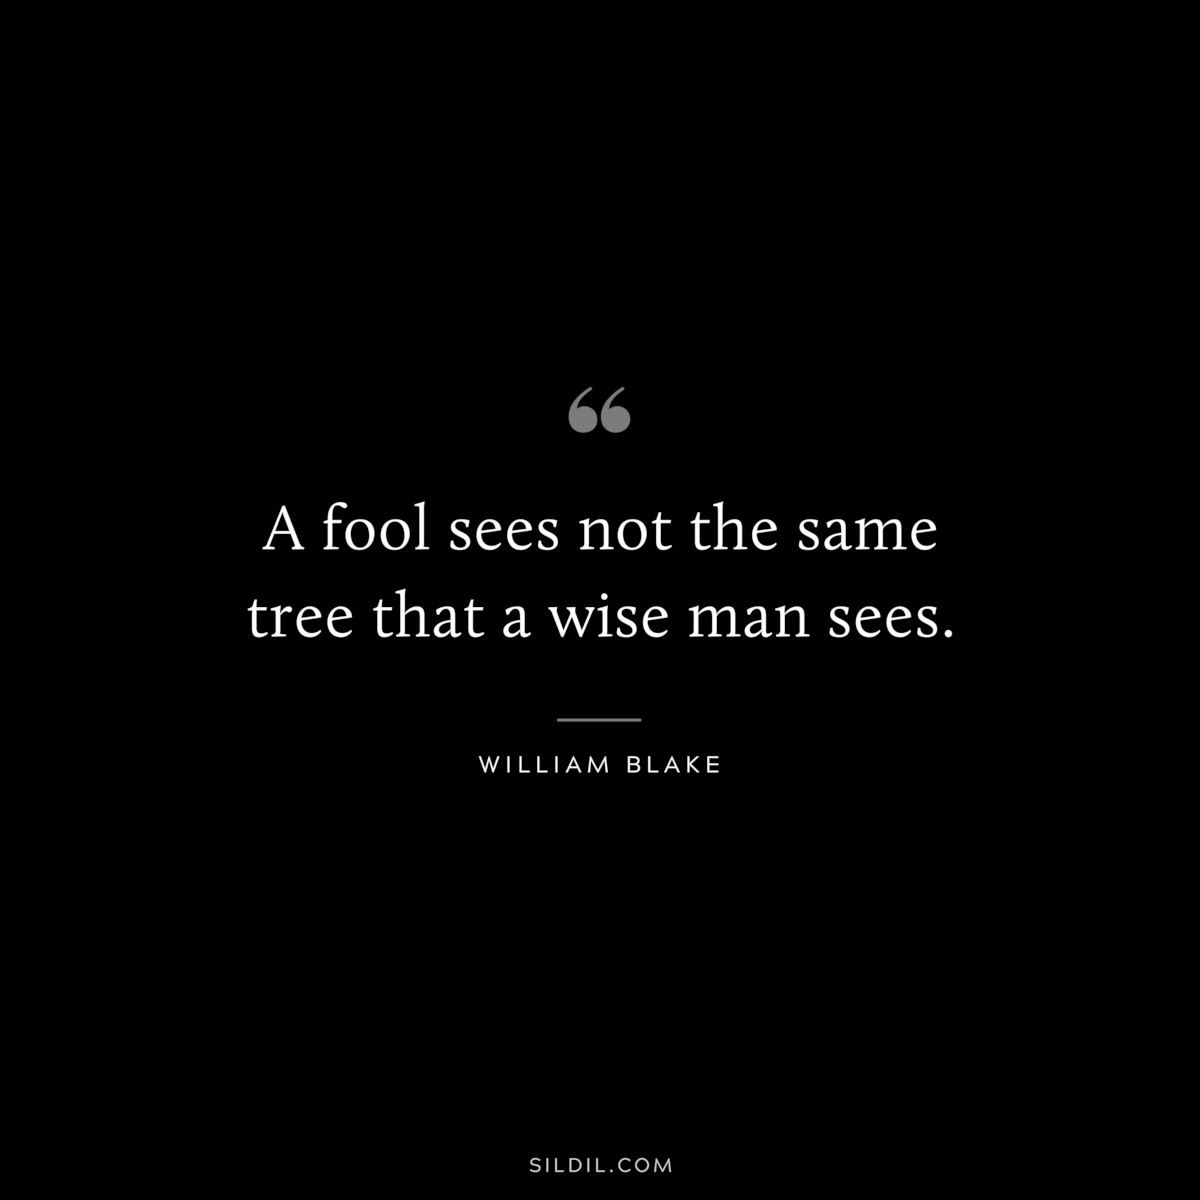 A fool sees not the same tree that a wise man sees. ― William Blake